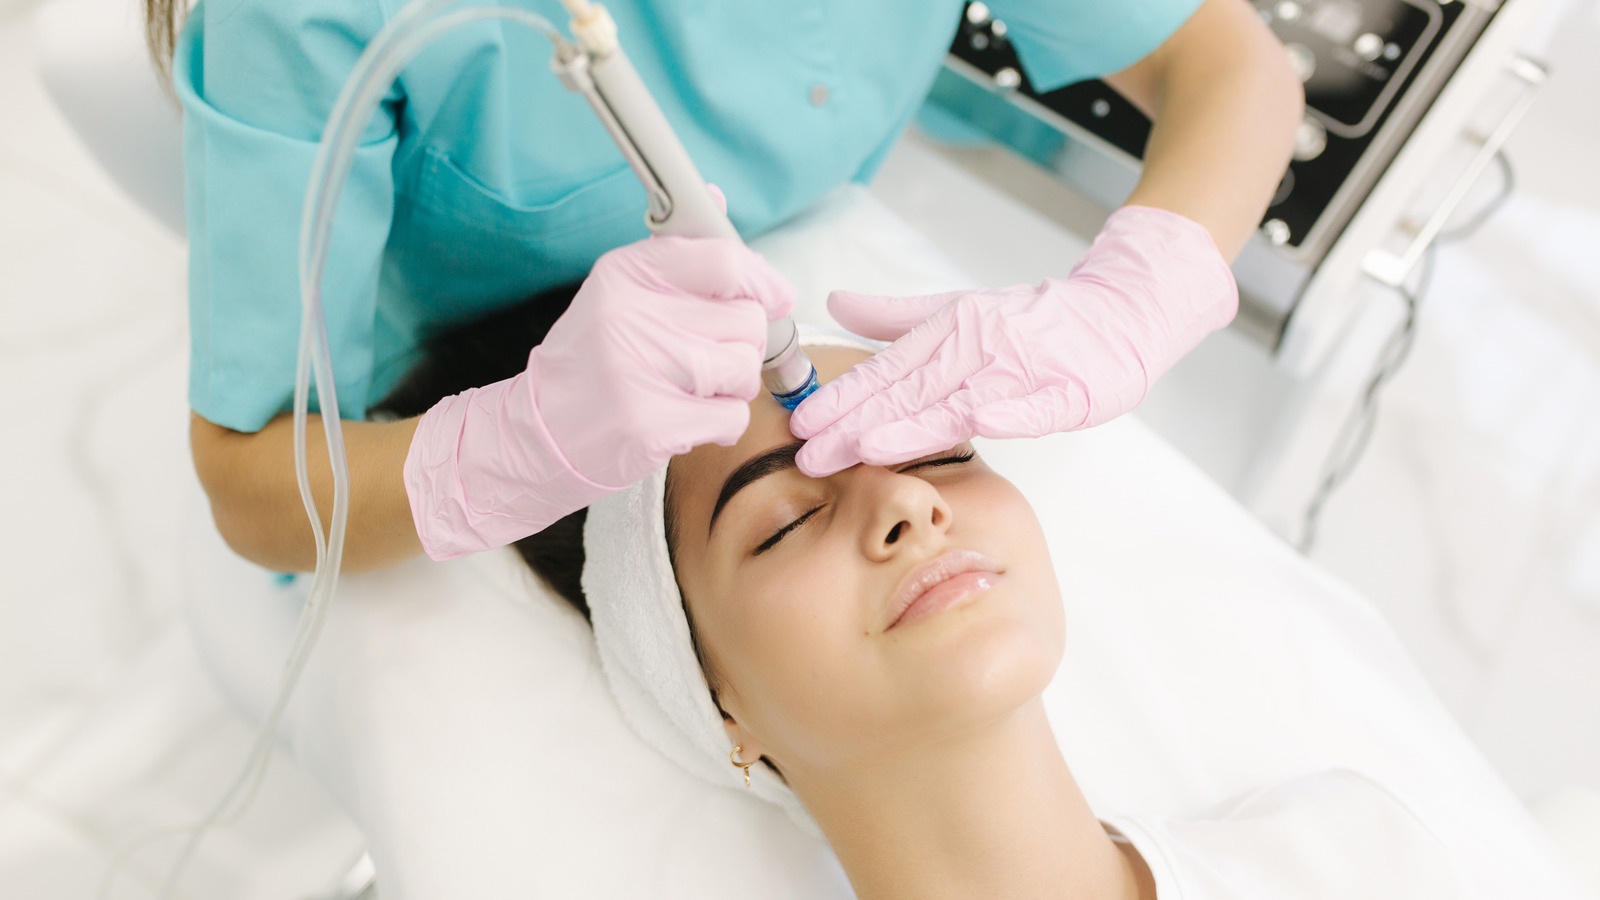 Aesthetician wearing gloves performs a facial treatment using a machine on a relaxed woman lying down with a headband.